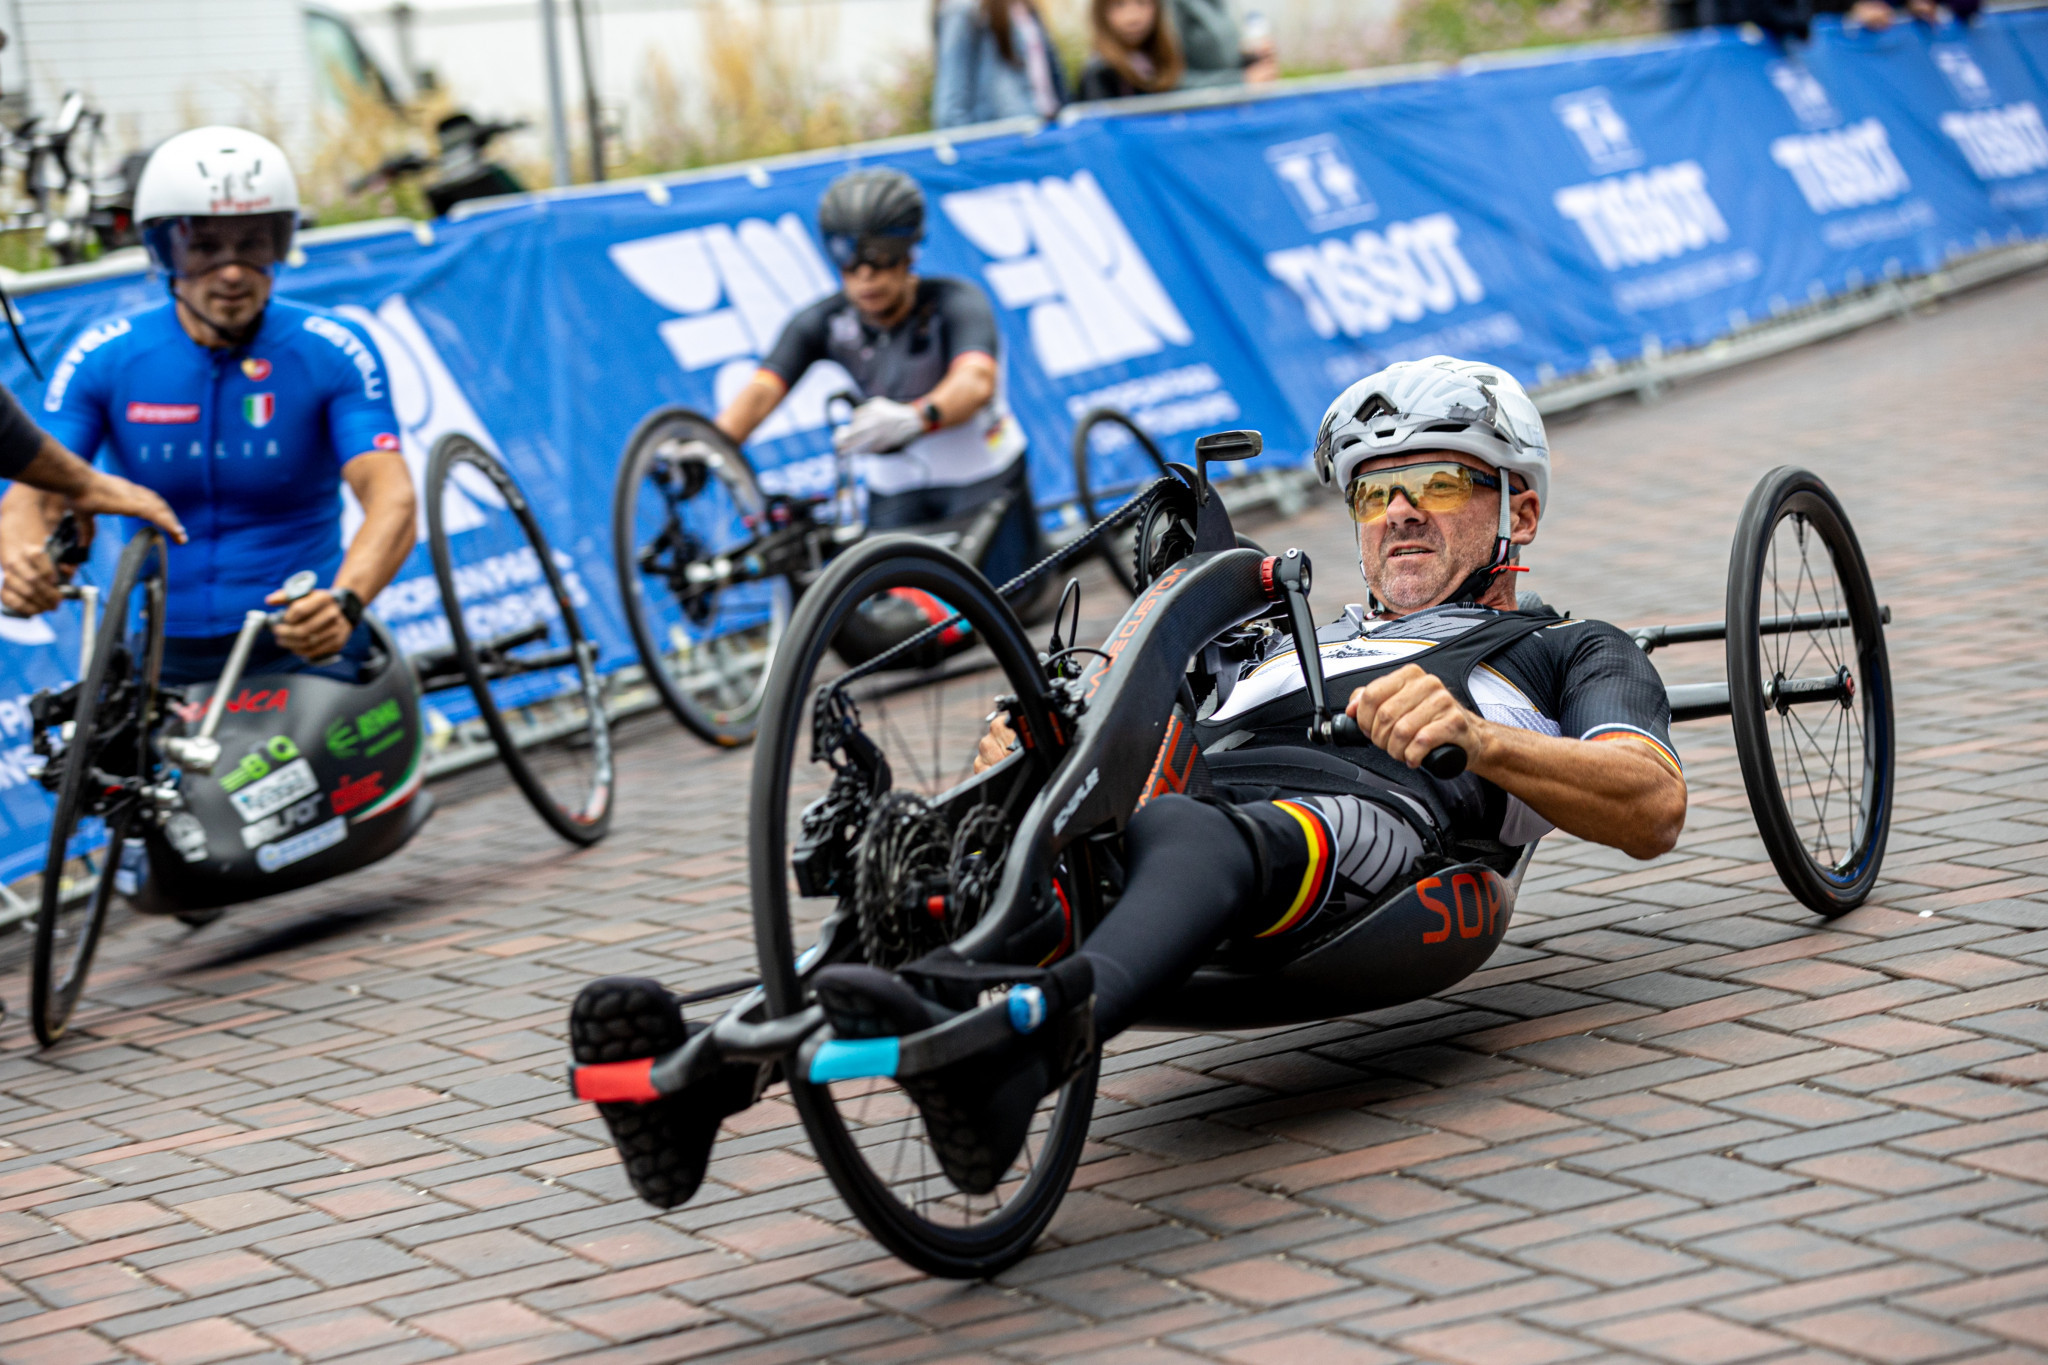 Scheepvaartkwartier in Rotterdam was the stage for the first day of Para cycling action ©EPC